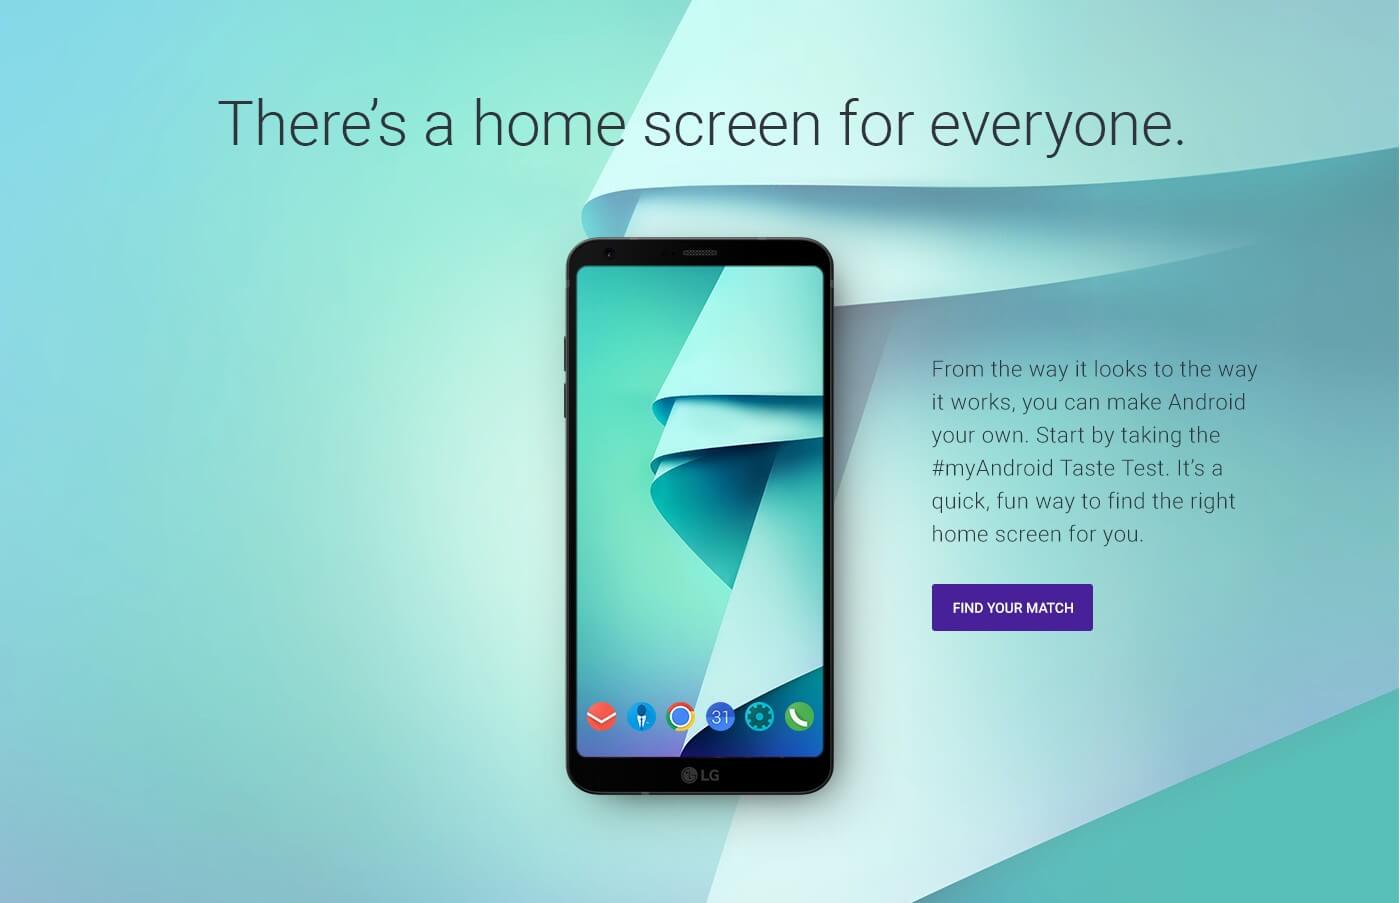 Google's new Android taste test website helps find a home screen tailored just for you